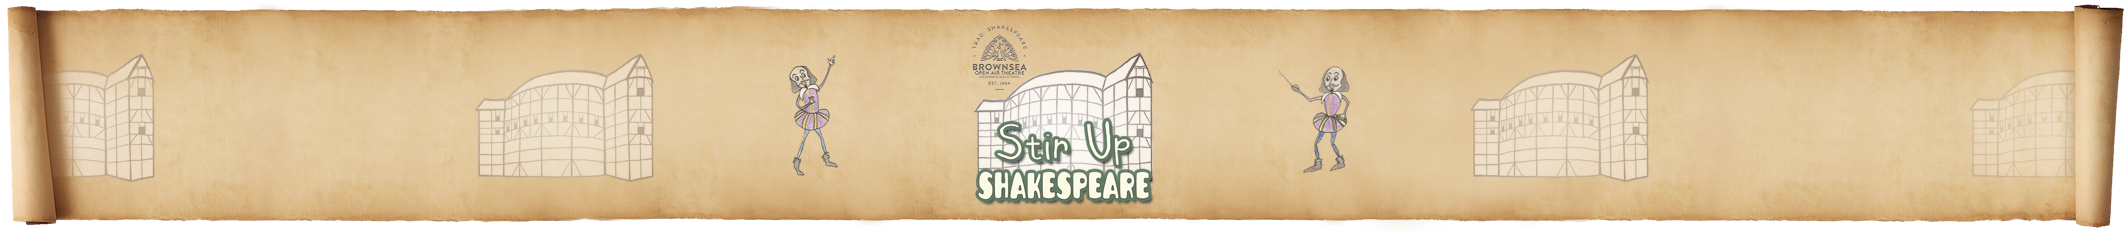 Stir Up Shakespeare, by Brownsea Open Air Theatre